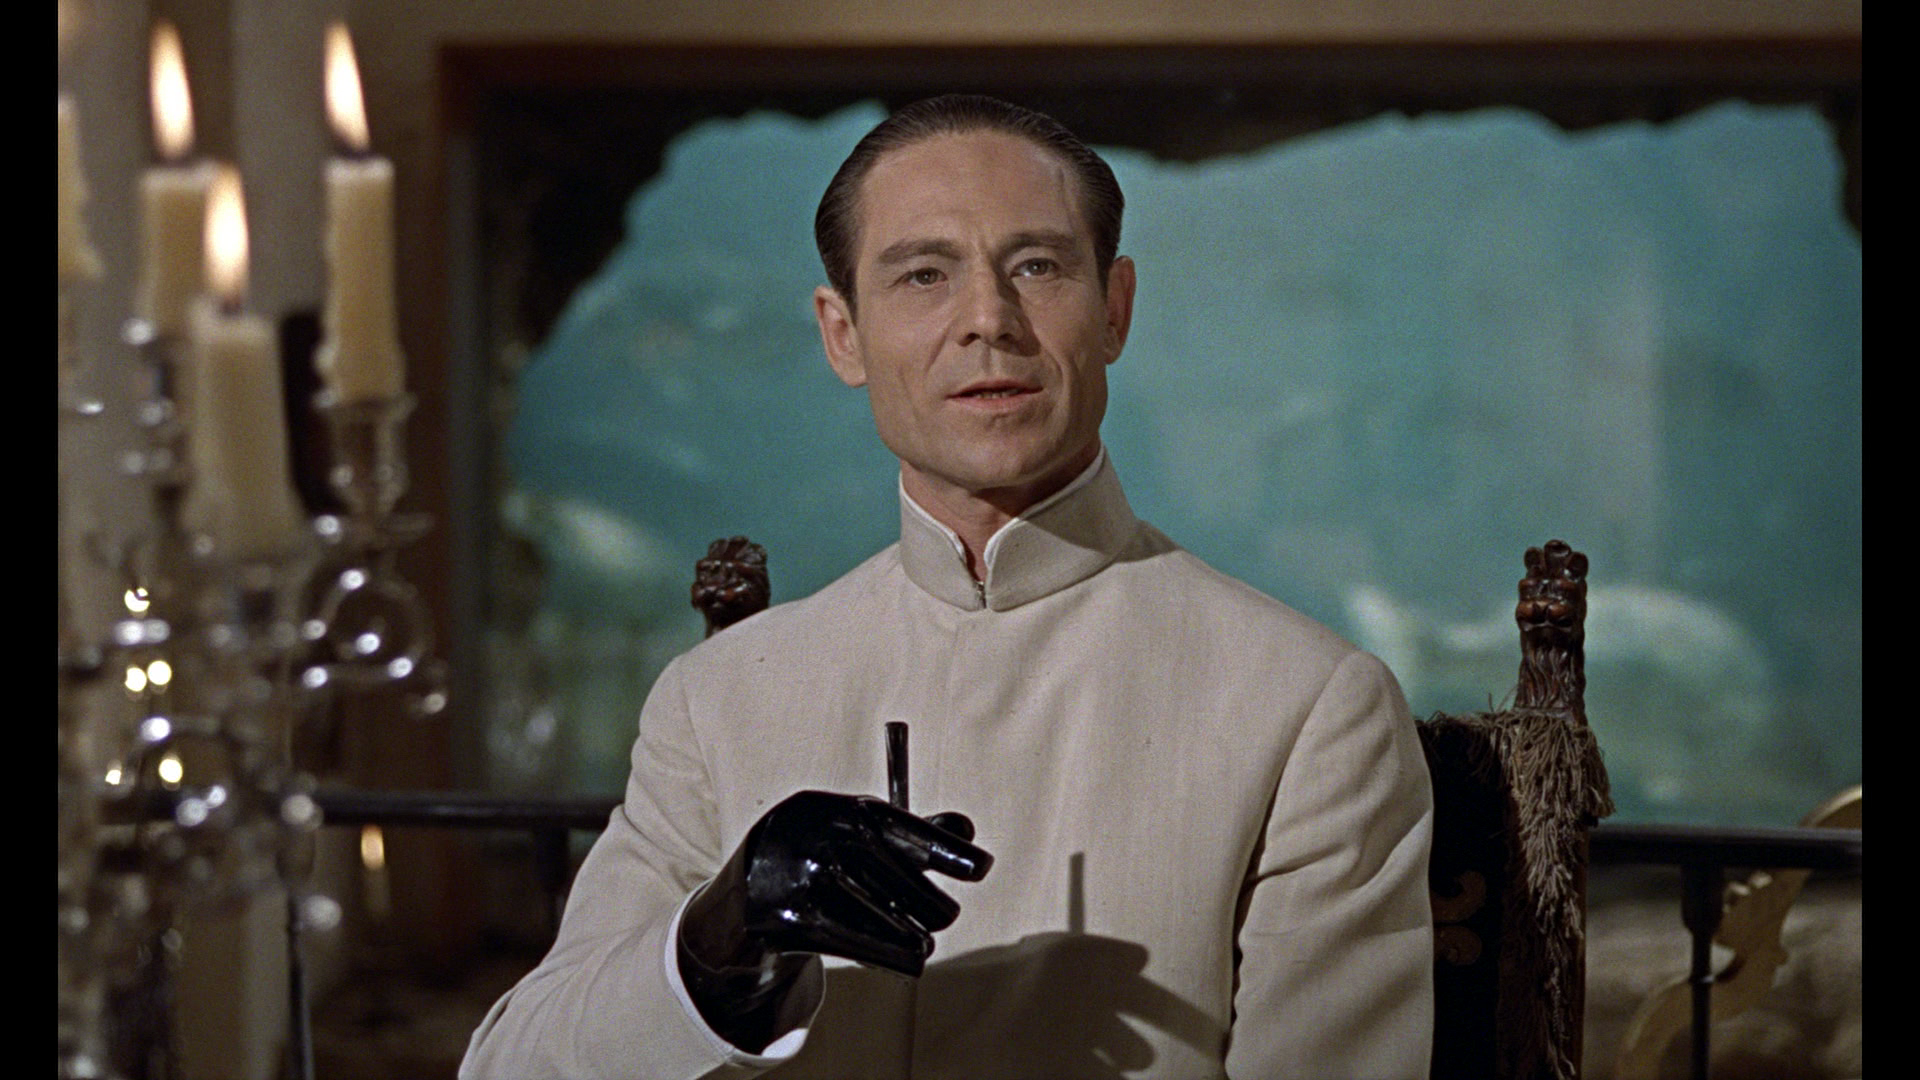 Amazing Dr. No Pictures & Backgrounds